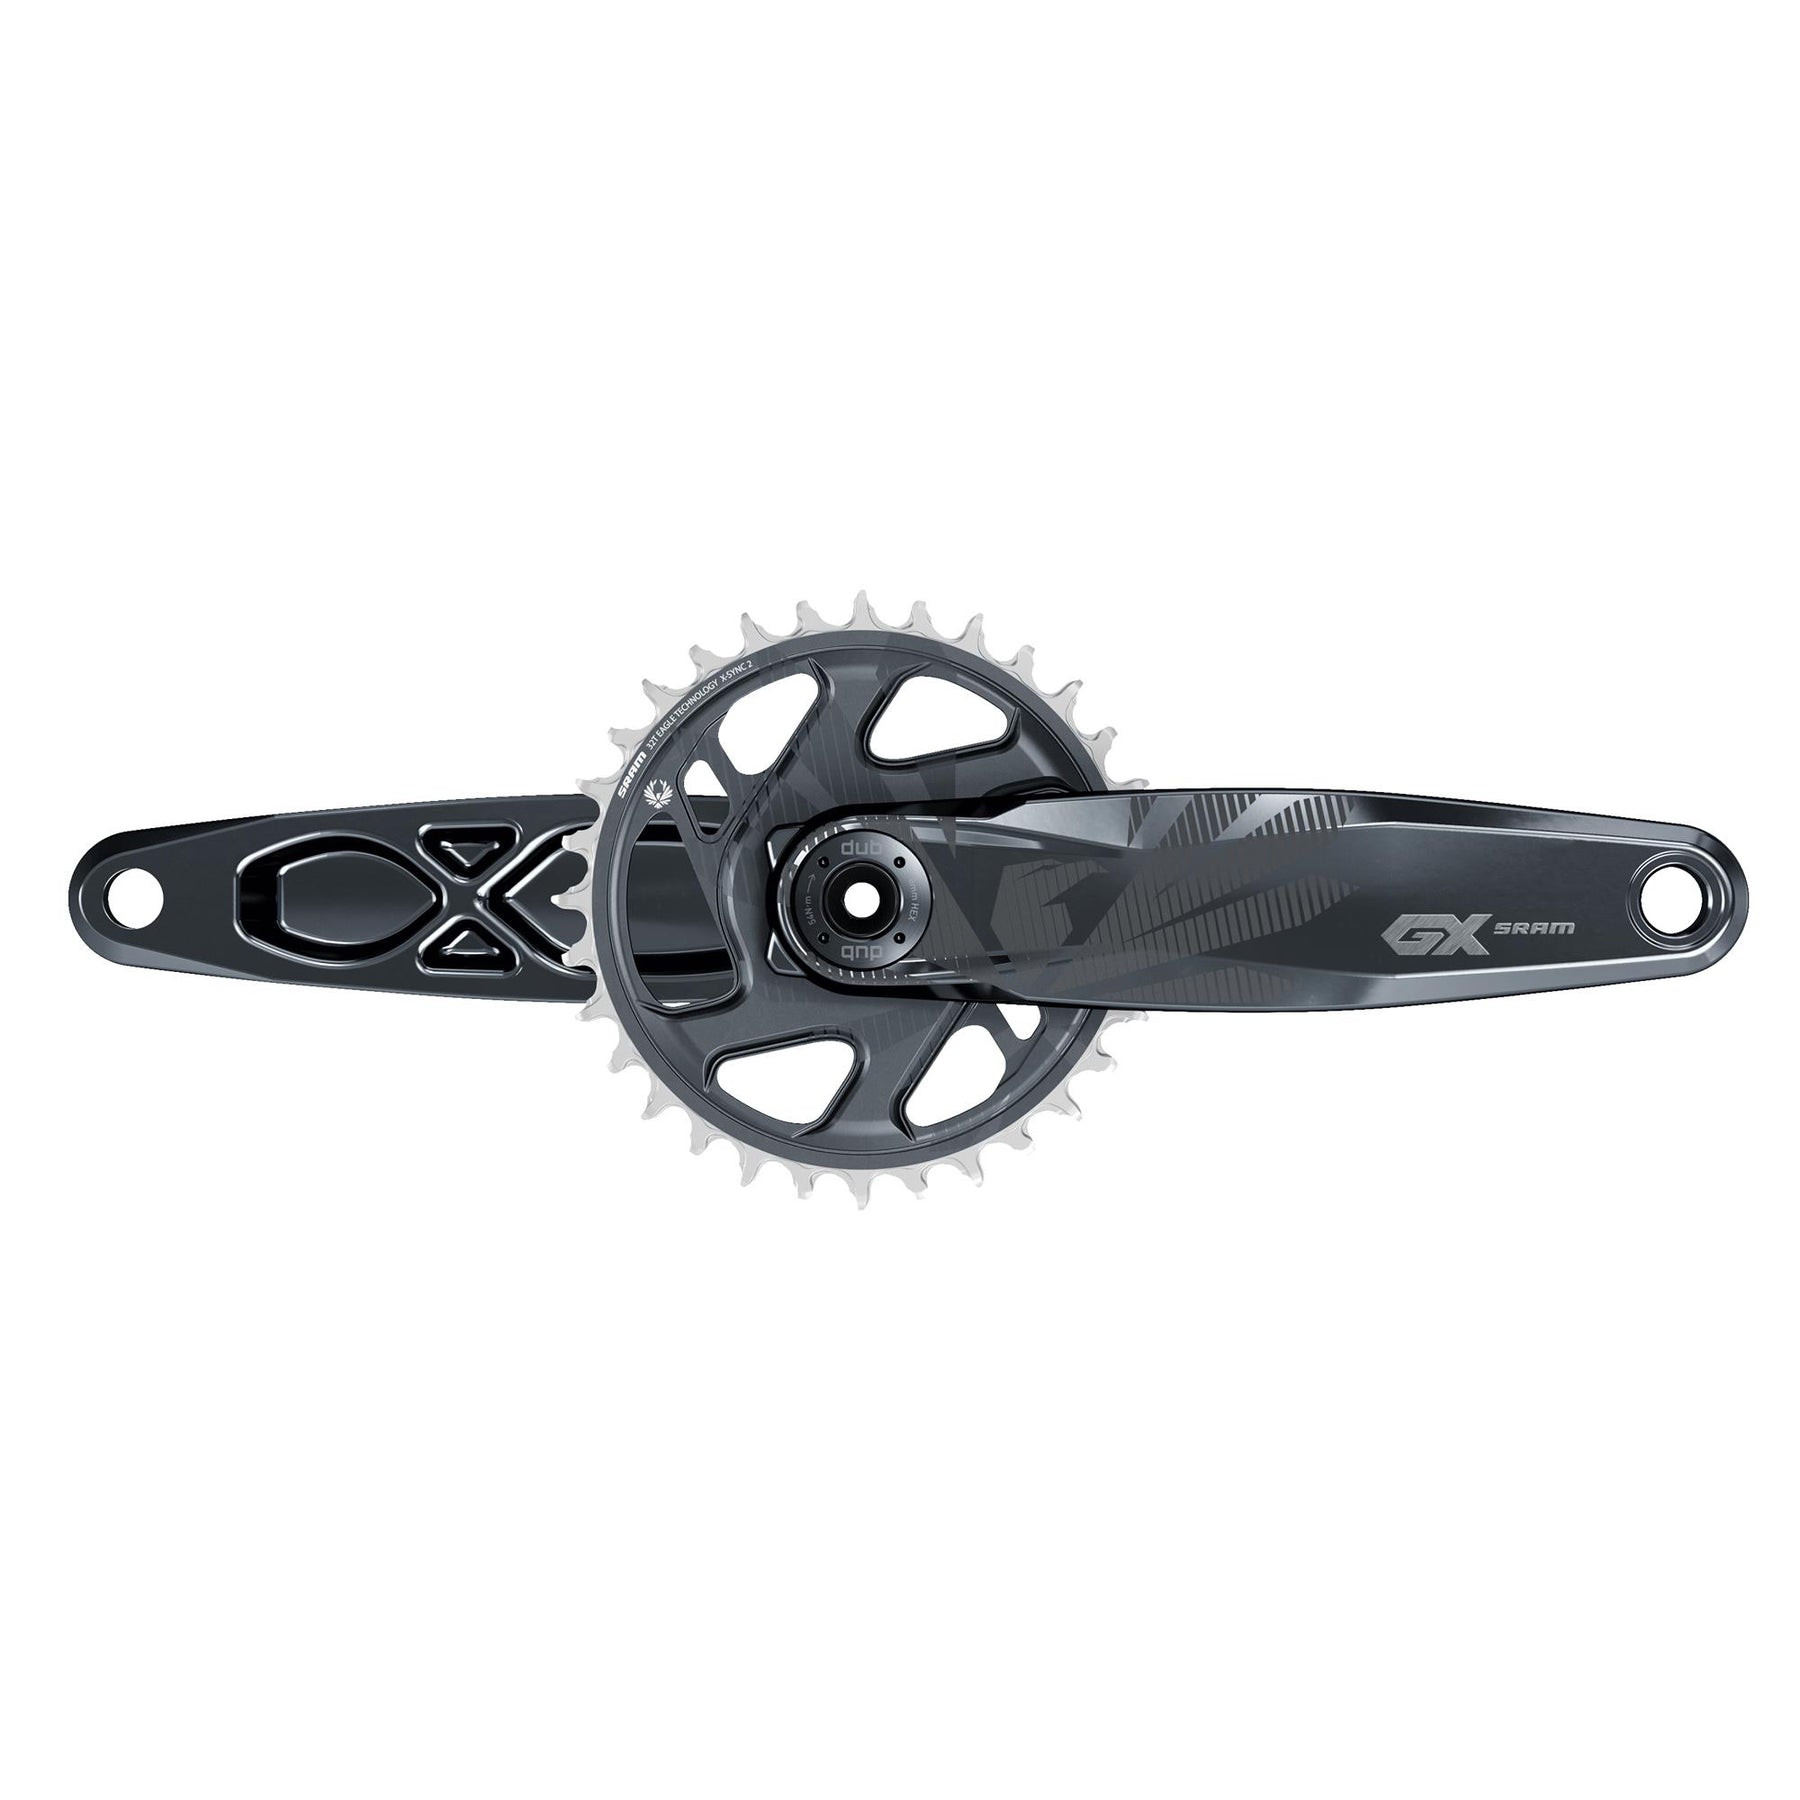 SRAM Crank Gx Eagle Fat Bike 4" Dub 12S With Direct Mount 30T X-Sync 2 Chainring (Dub Cups/Bearings Not Included)